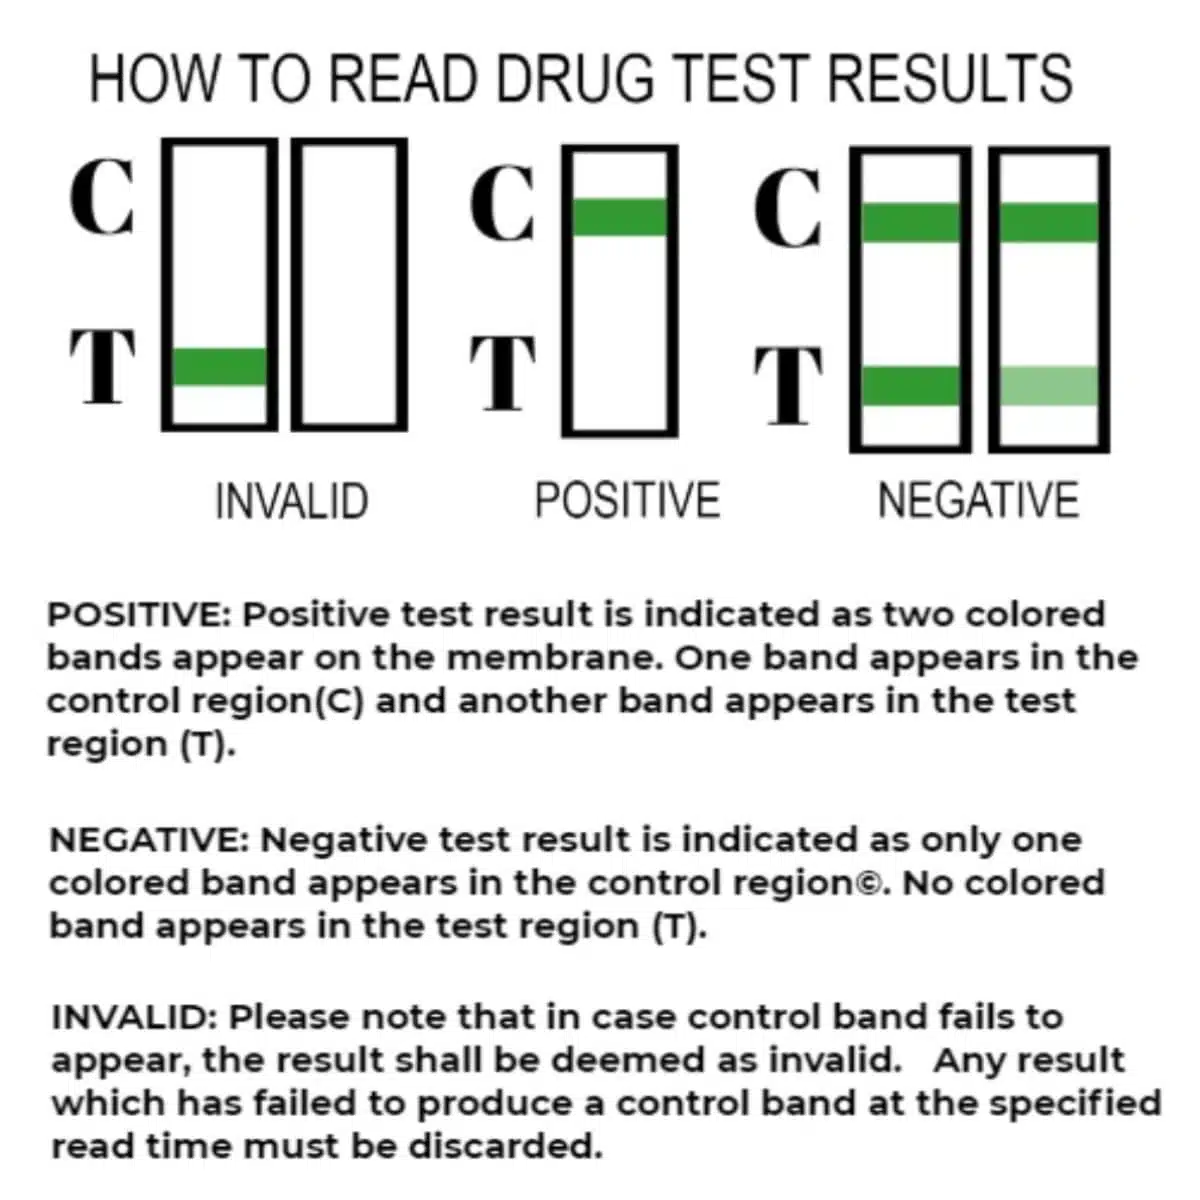 1 ovusmedical.com how to read drug test results